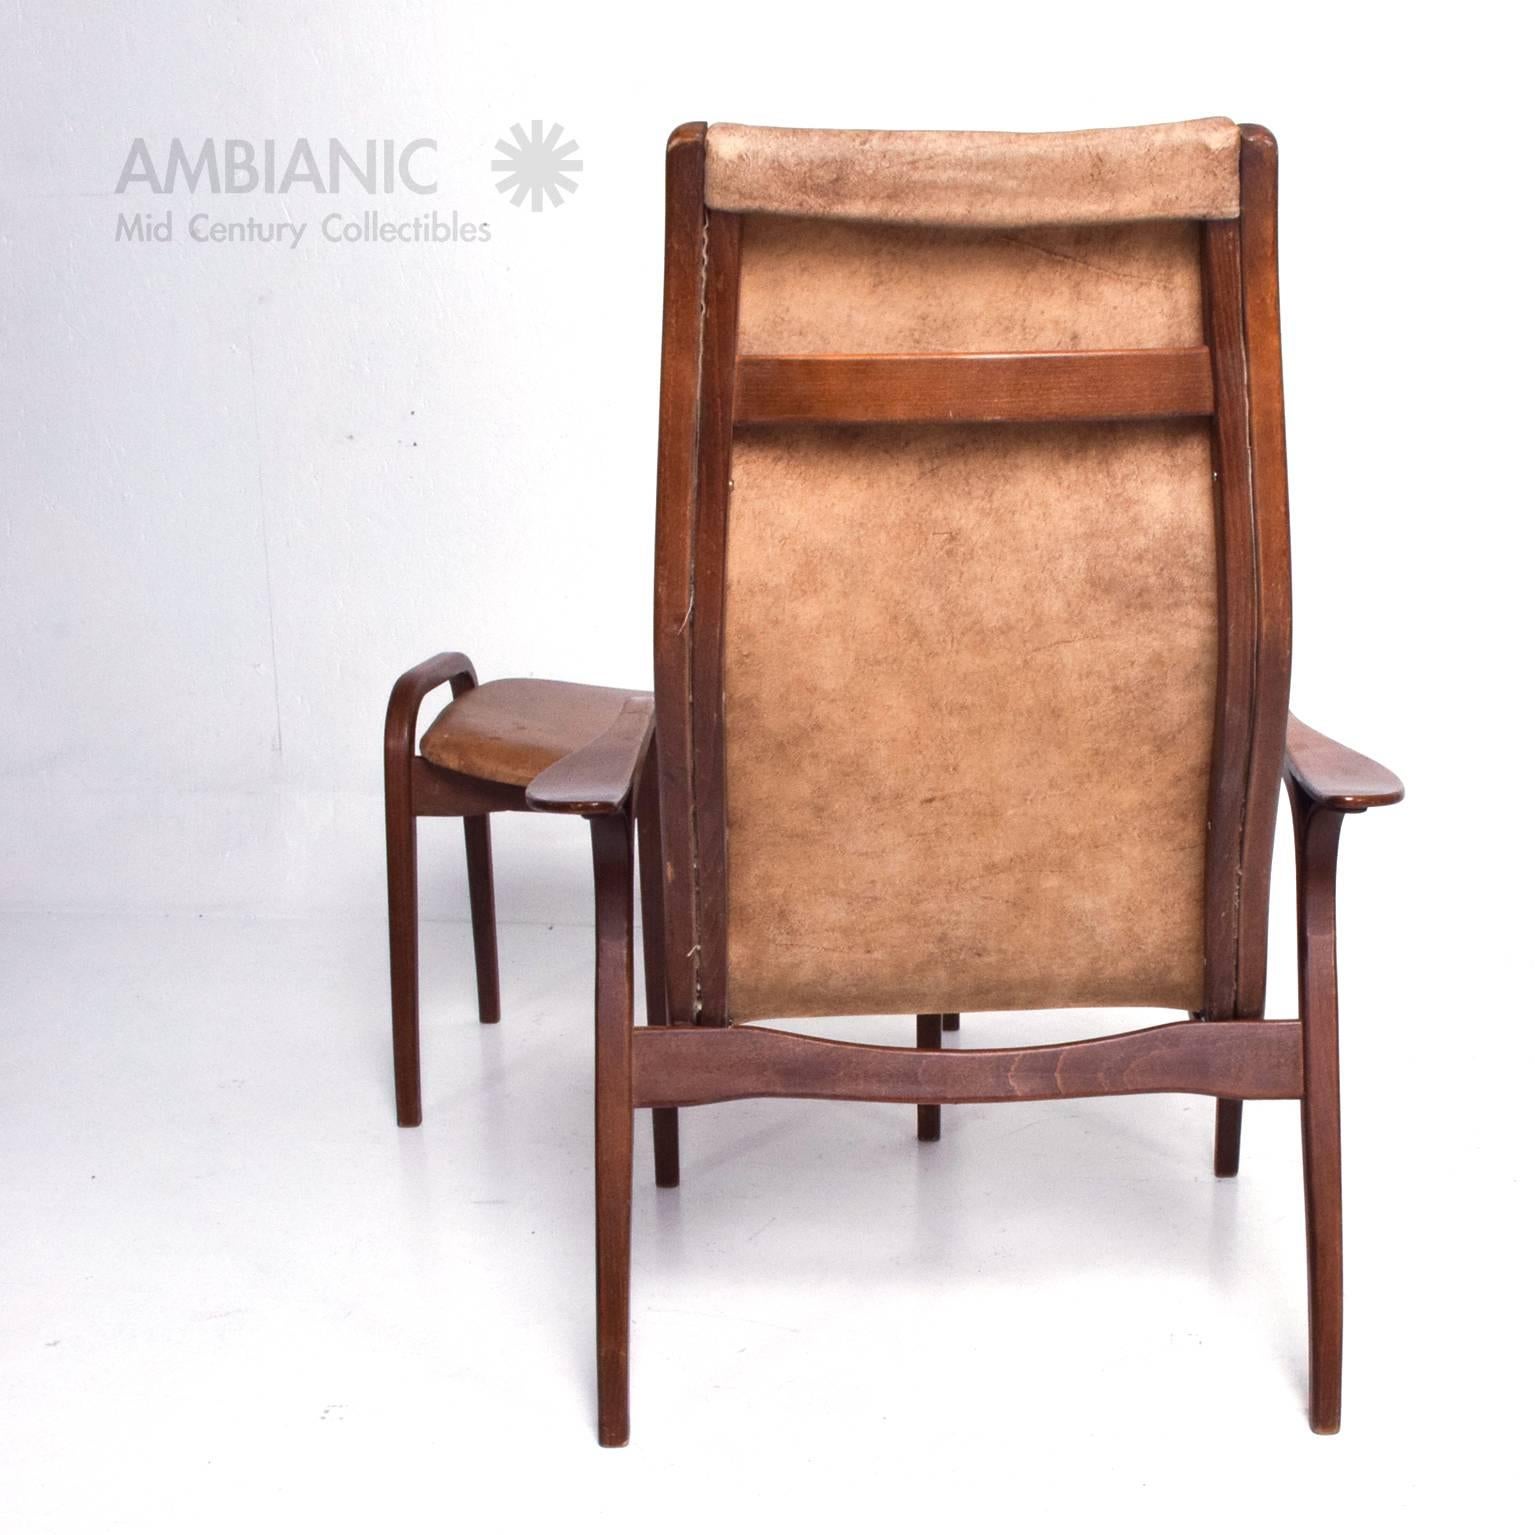 For your consideration a Mid-Century Danish modern Lamino chair designed by Yngve Ekstrom for Swedese. 

Sculptural chair with matching ottoman. 

Wood has the original finish. Expect signs of vintage wear. Unrestored.
Leather appears to have